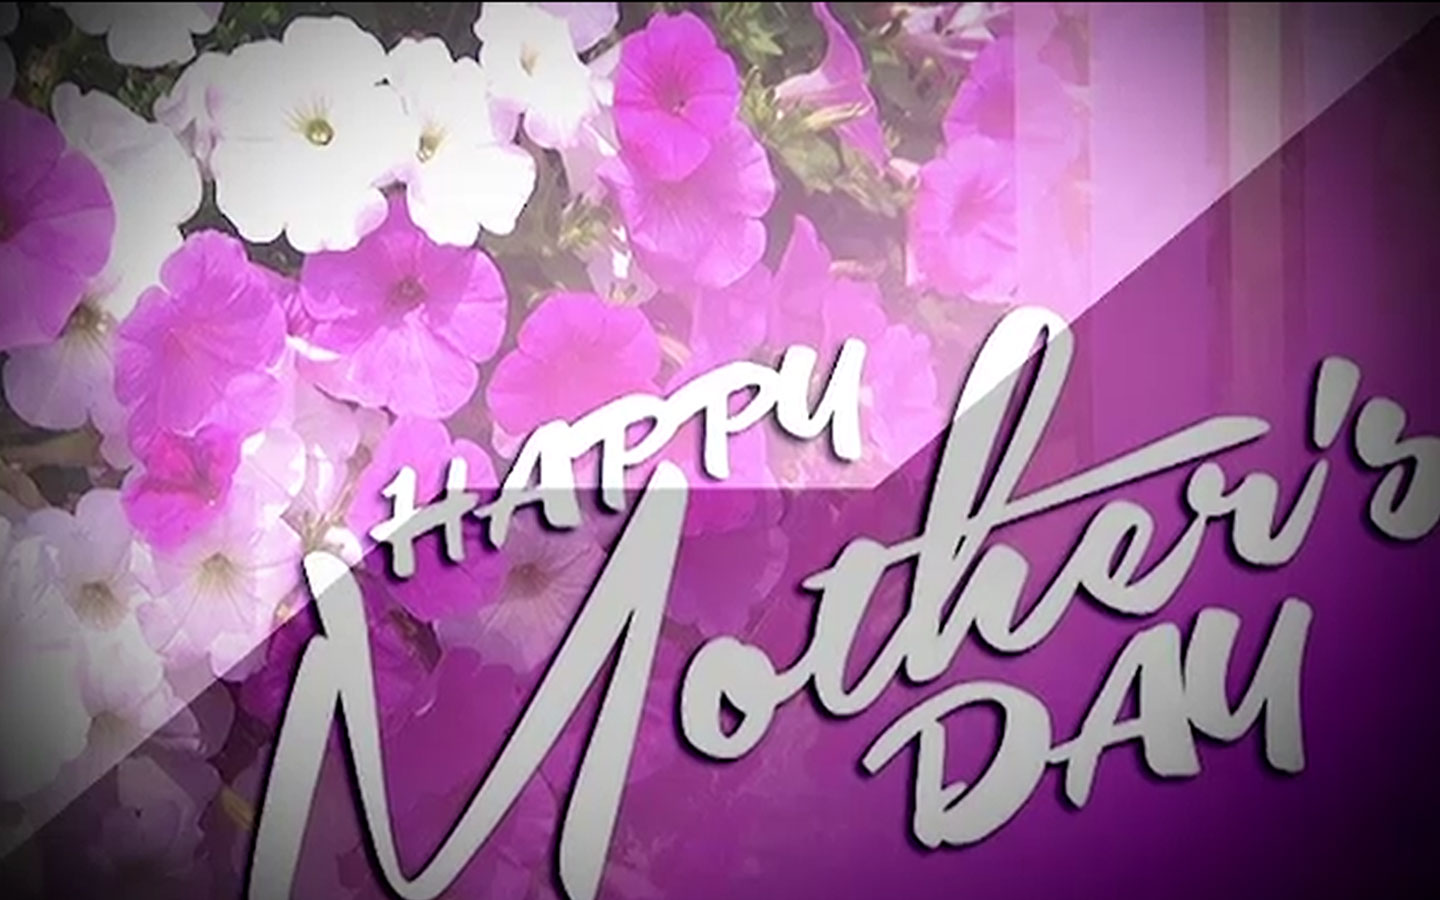 Mother’s Day being celebrated today